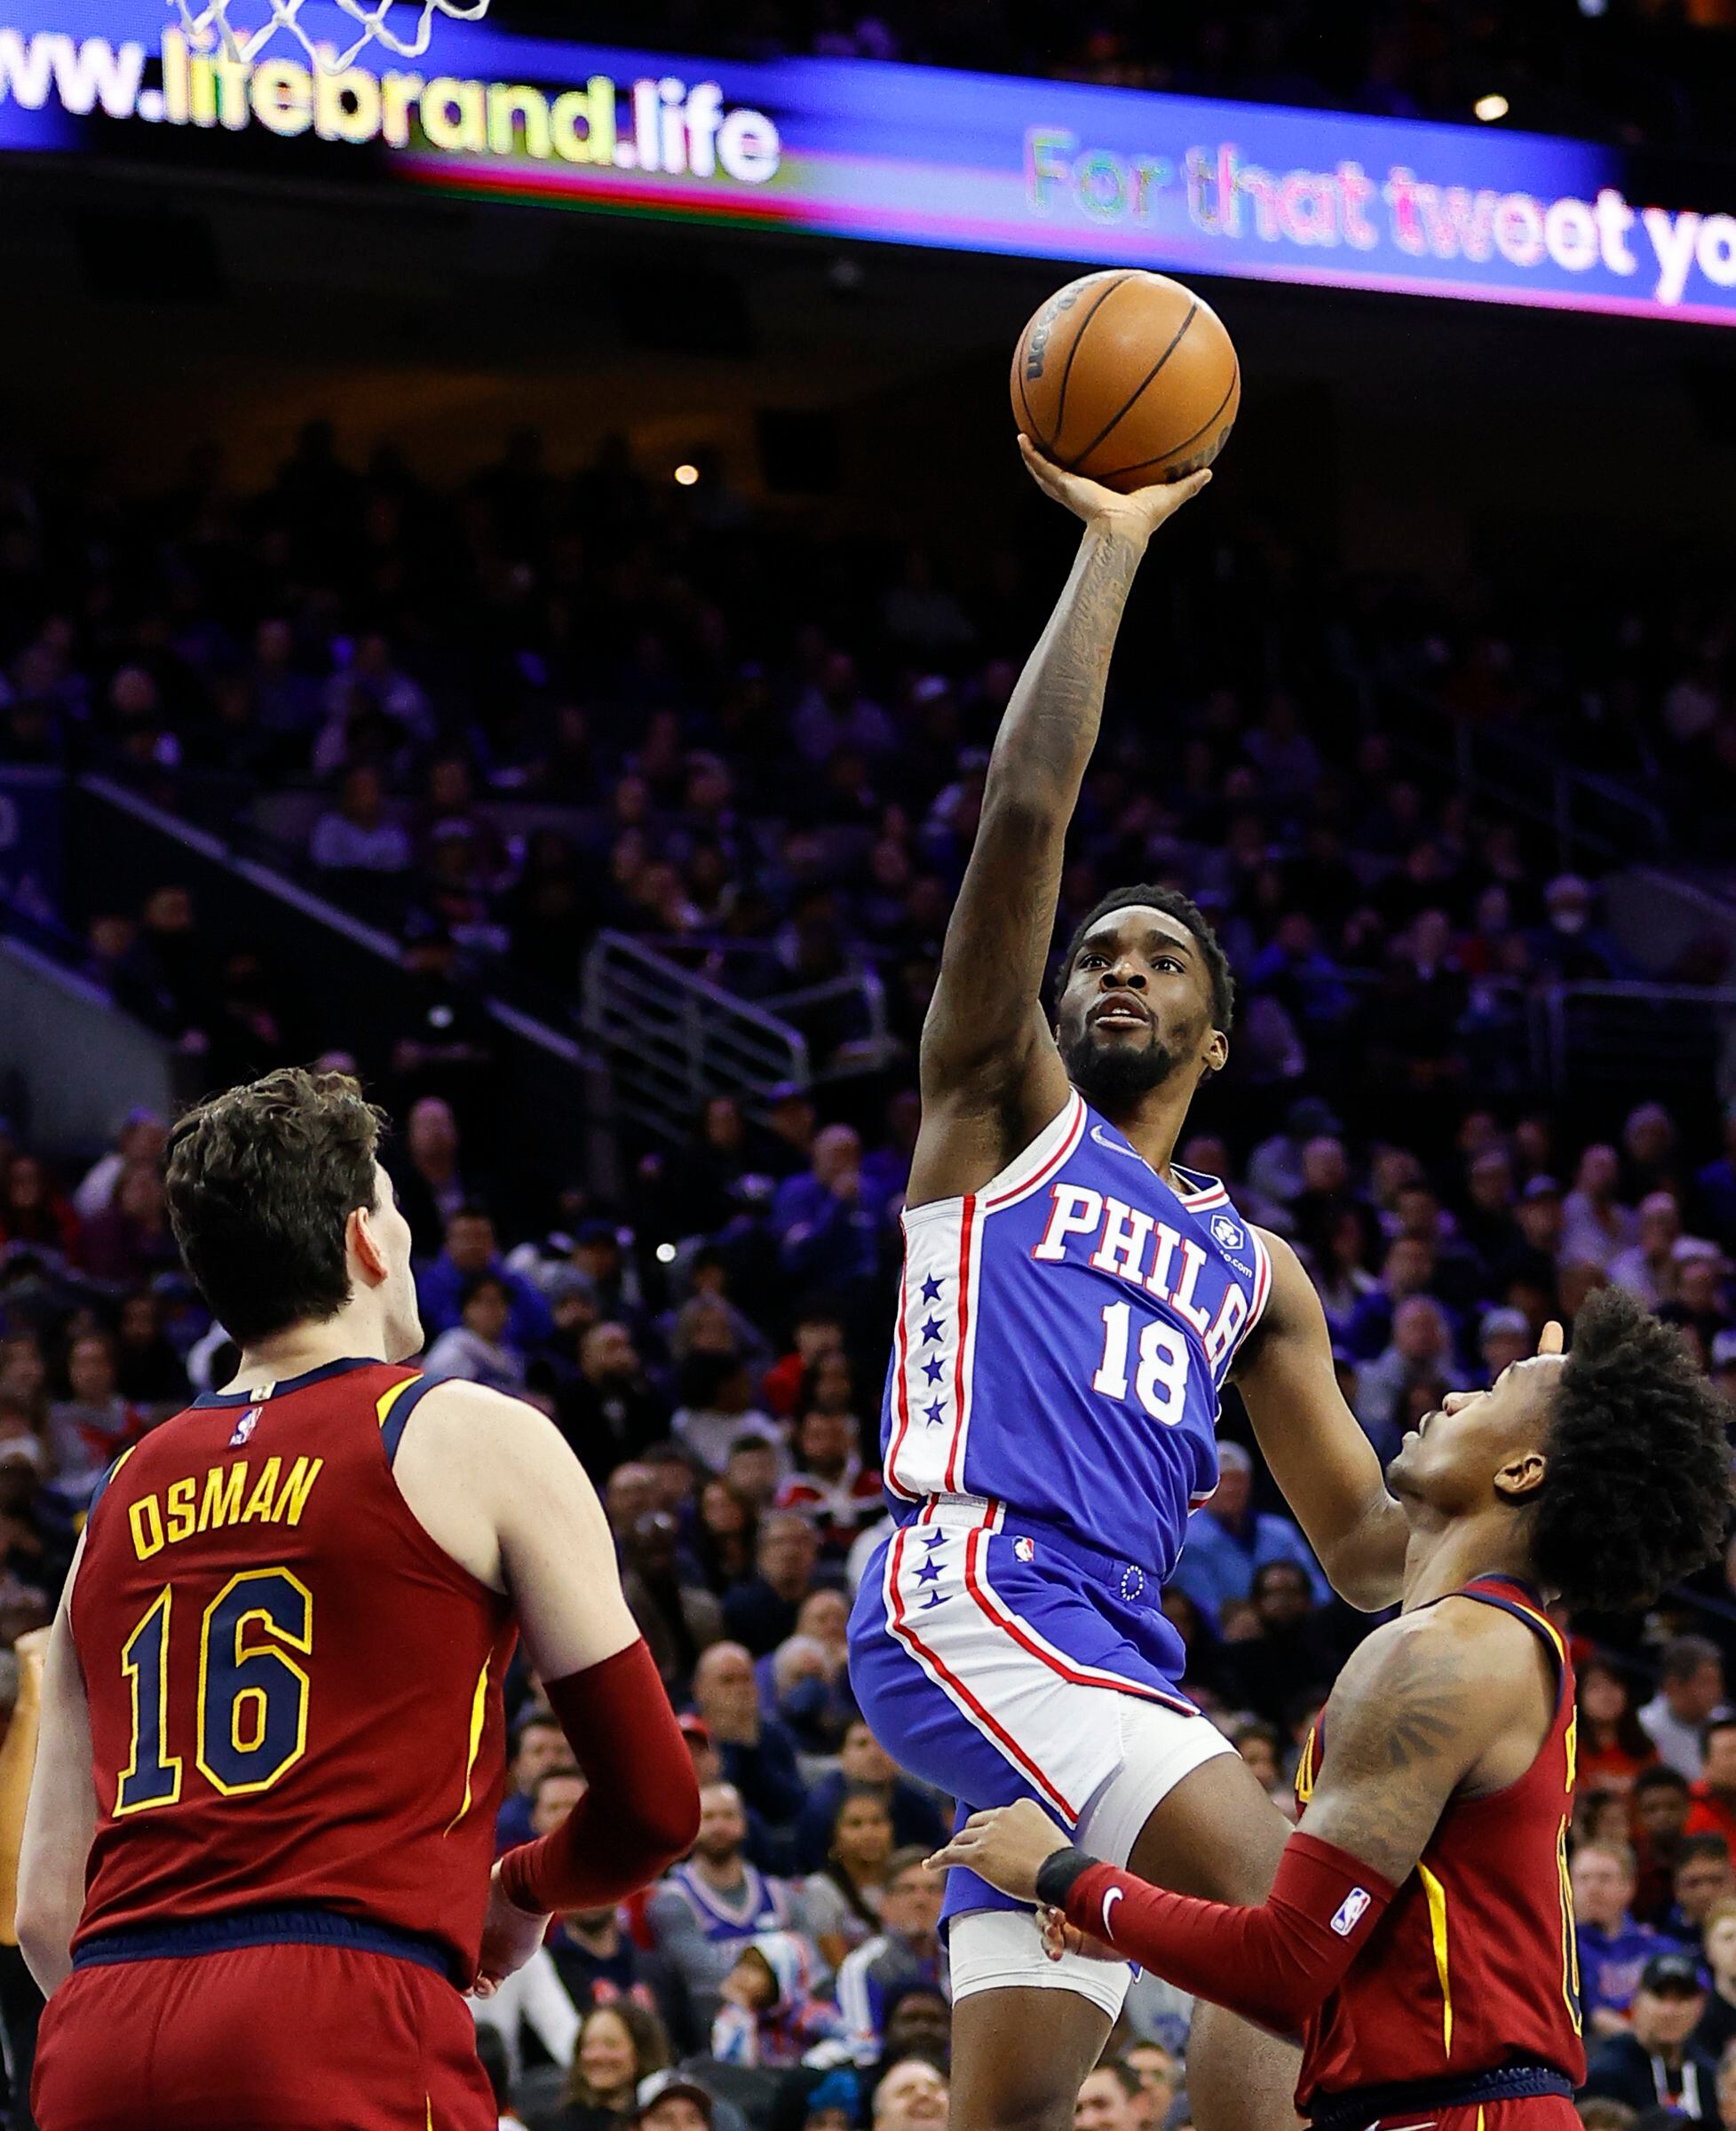 Tyrese Maxey propels the Sixers' comeback in 125-119 win over Cavaliers